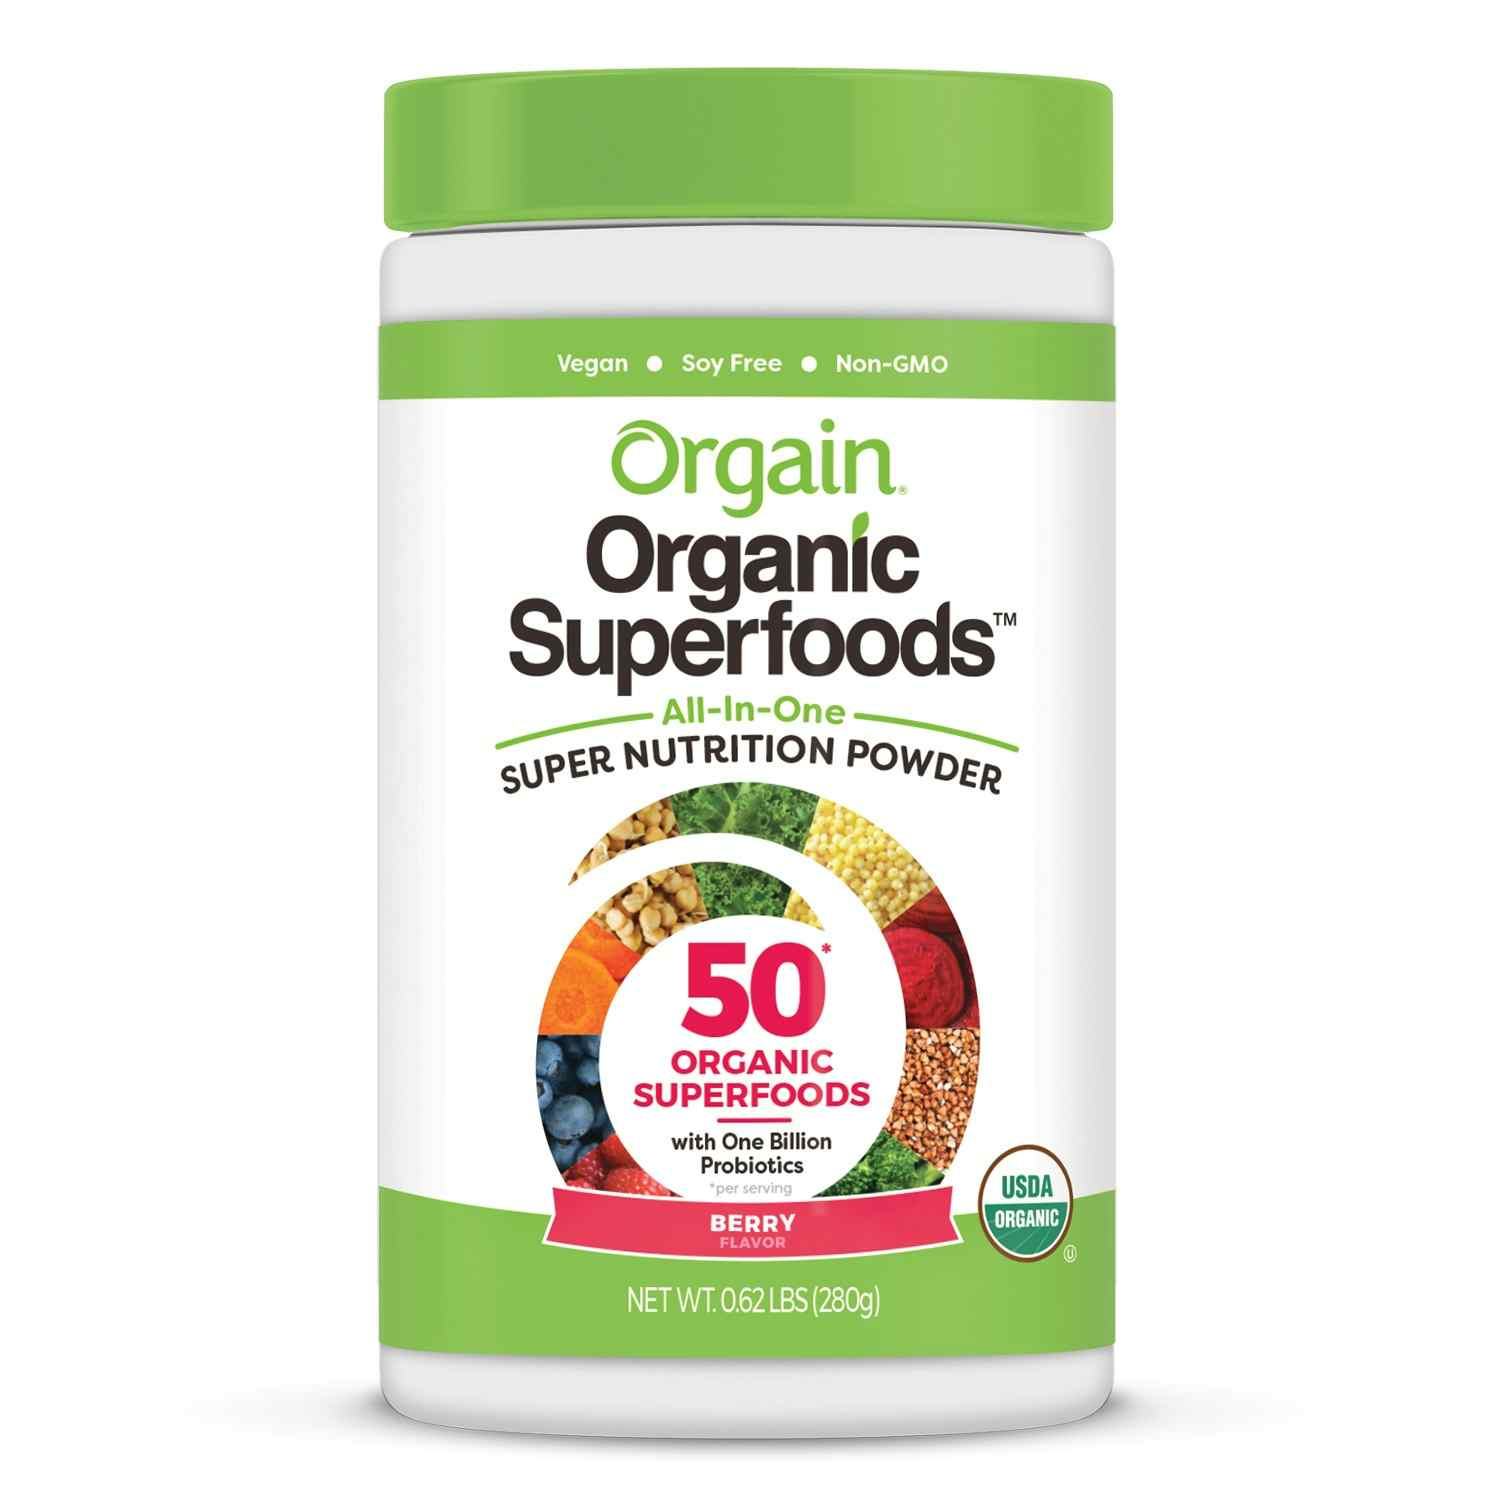 Orgain Organic Superfoods All-In-One Super Nutrition Powder, 851770003988, Berry Flavor - 0.62 lb Canister